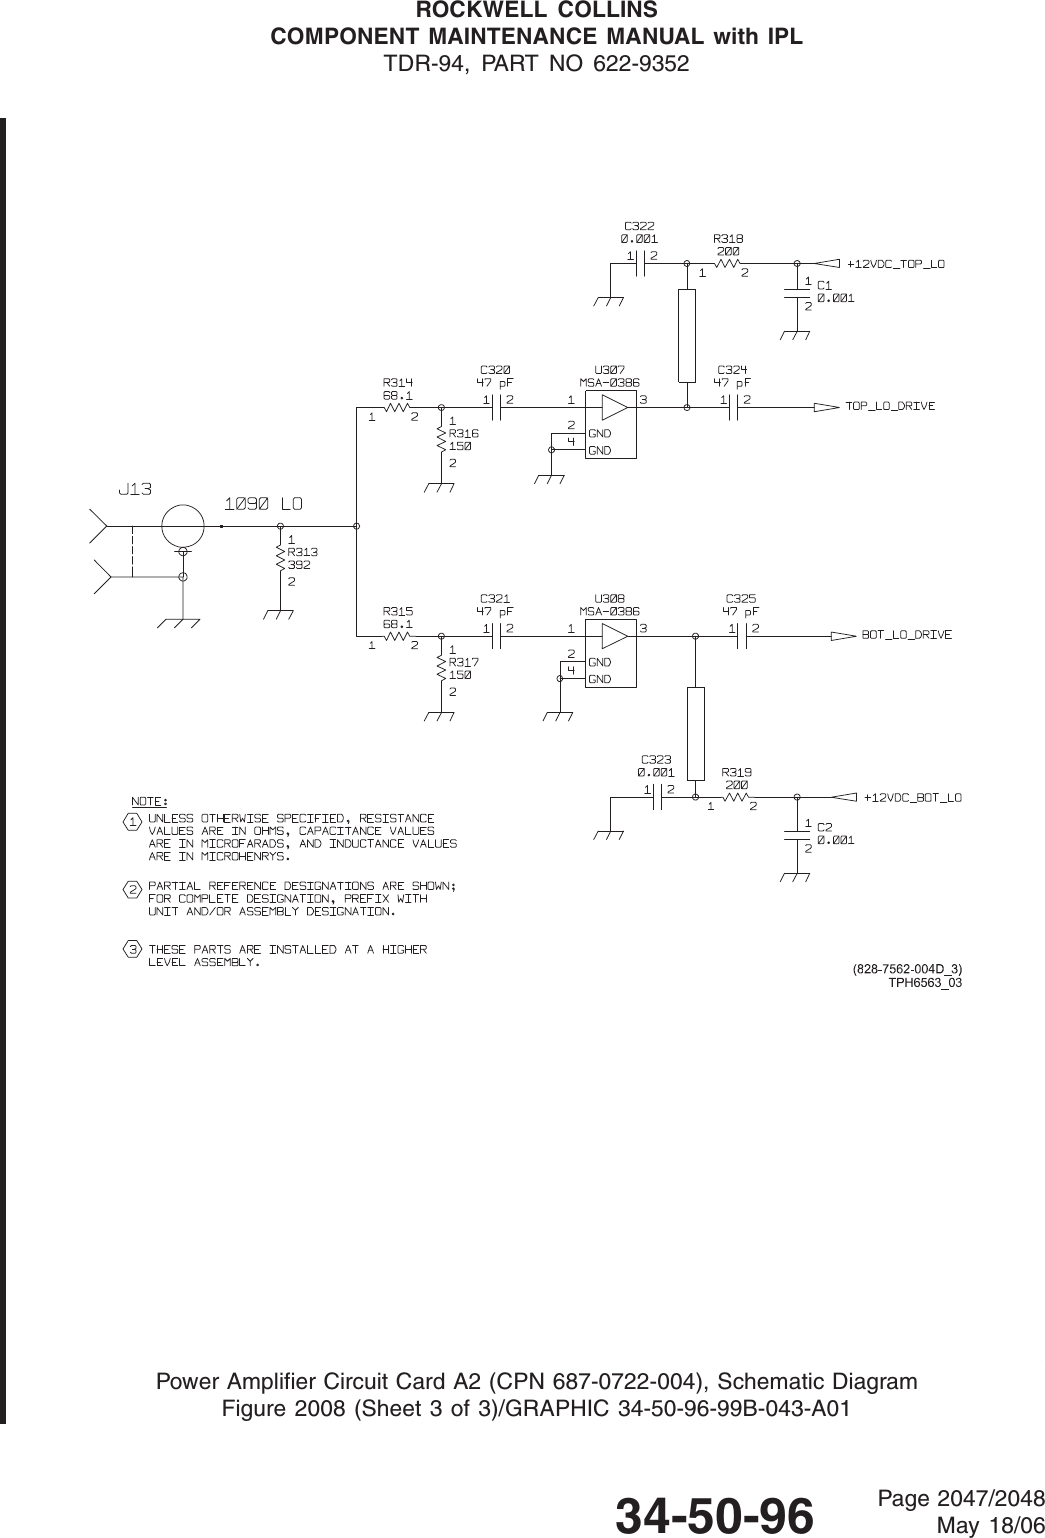 ROCKWELL COLLINSCOMPONENT MAINTENANCE MANUAL with IPLTDR-94, PART NO 622-9352Power Amplifier Circuit Card A2 (CPN 687-0722-004), Schematic DiagramFigure 2008 (Sheet 3 of 3)/GRAPHIC 34-50-96-99B-043-A0134-50-96 Page 2047/2048May 18/06